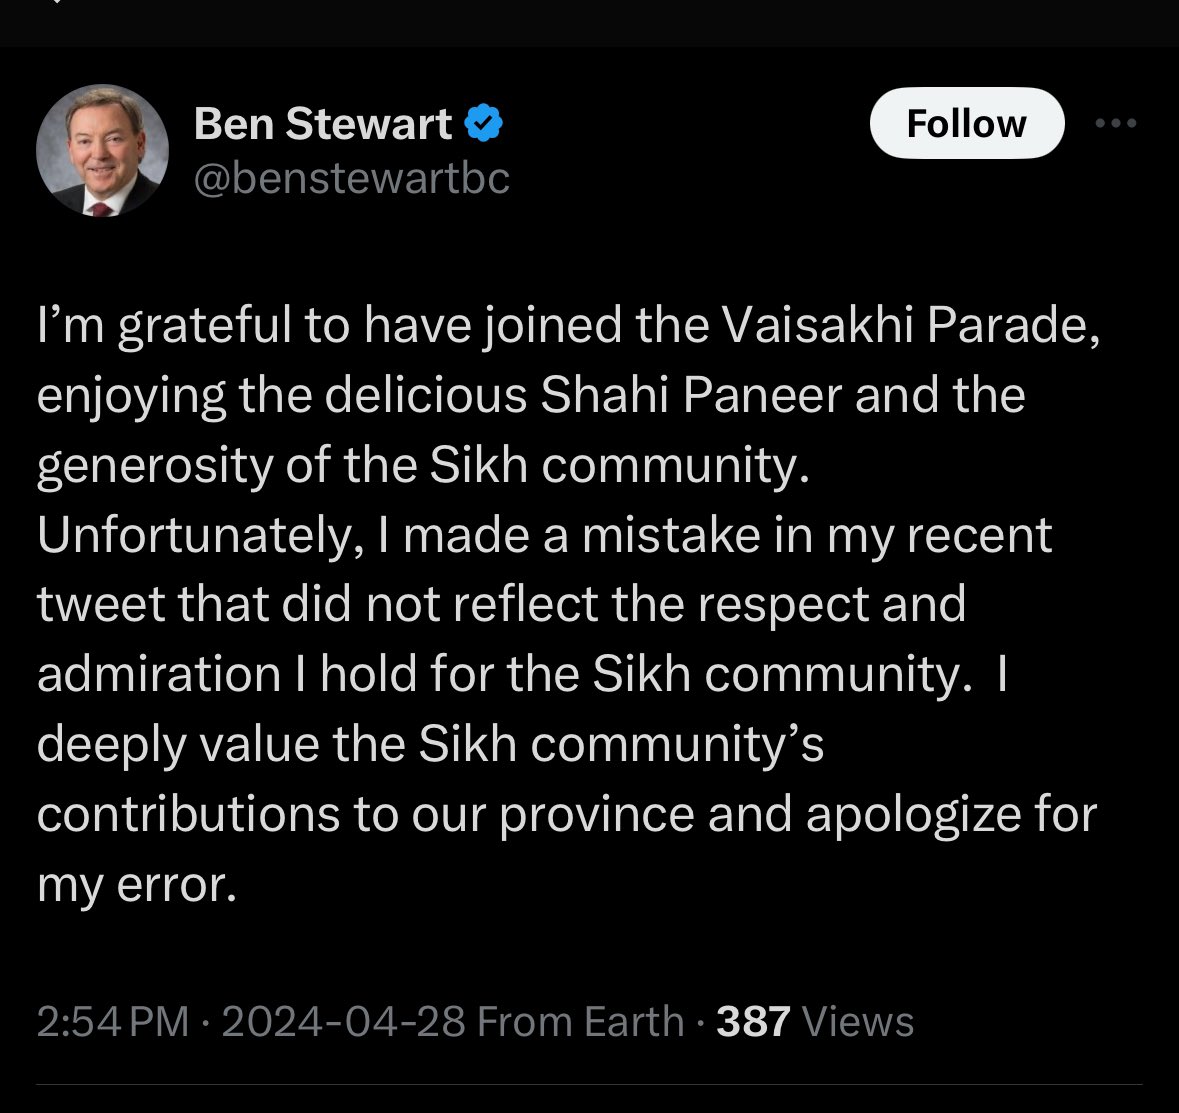 BC United MLA from Kelowna West, Ben Stewart, has admitted his mistake, apologized for his error, & clarified that he had Shahi Paneer at Vaisakhi Parade/Nagar Keertan in Kelowna. The apology came after he tweeted that he had Warm Butter Chicken there & then took down the tweet.